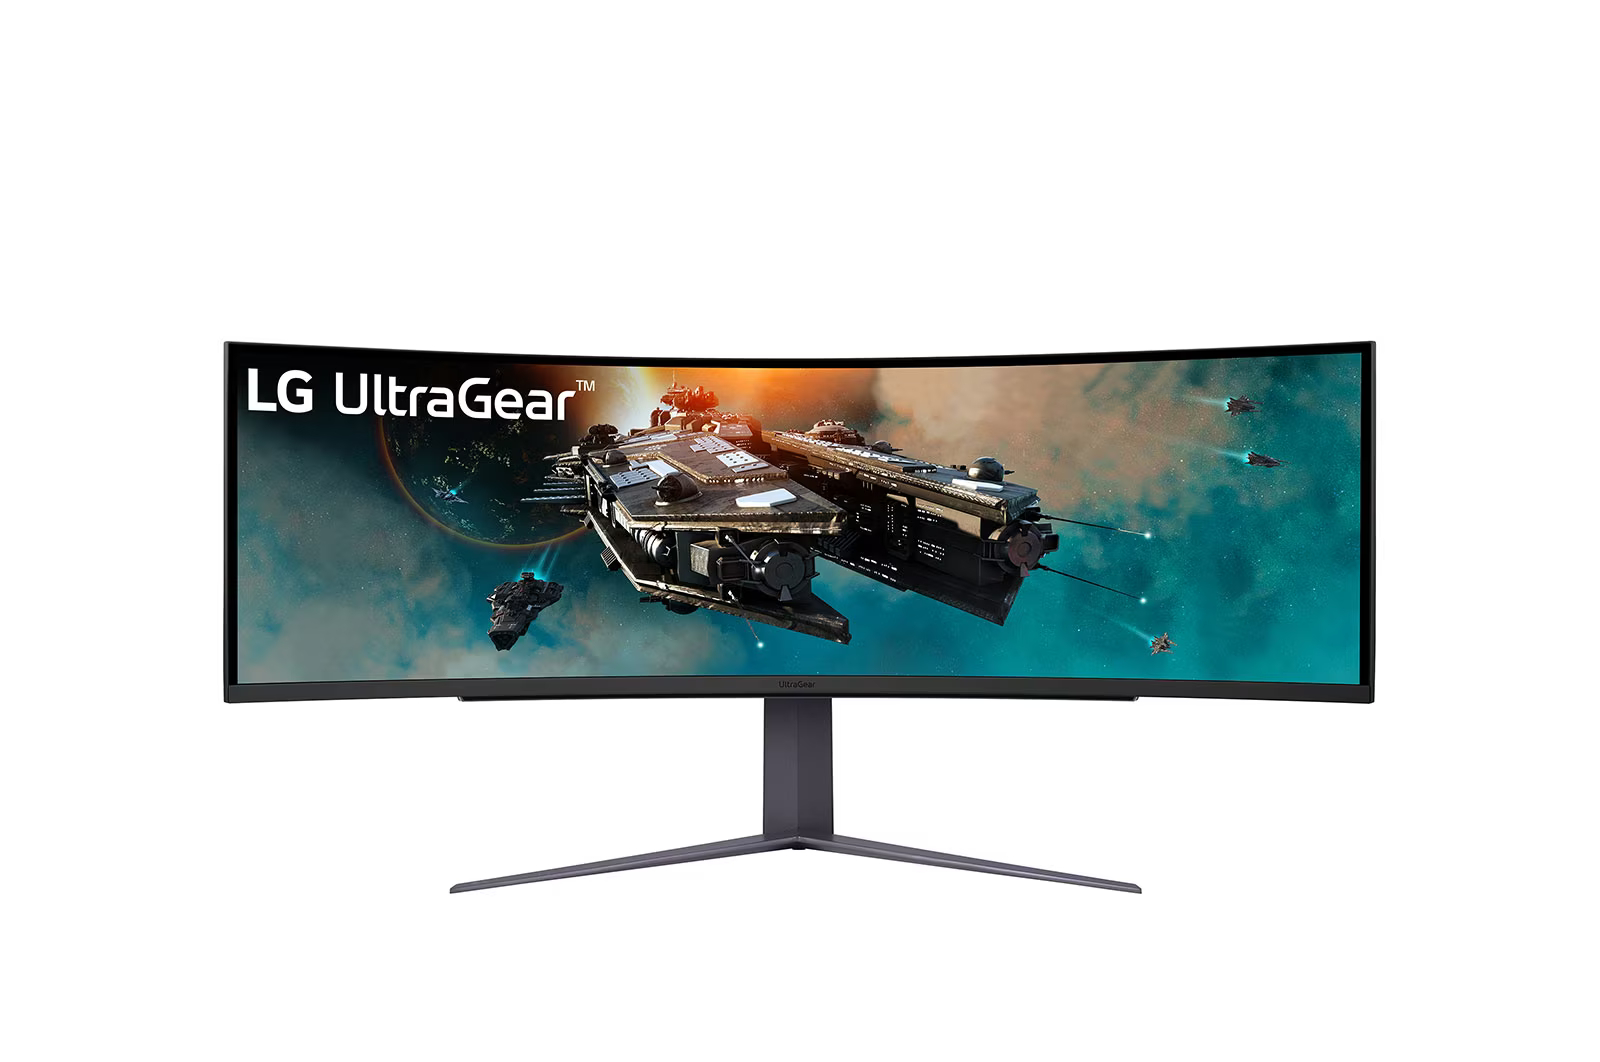 Media asset in full size related to 3dfxzone.it news item entitled as follows: Il gaming monitor LG UltraGear 49GR85DC-B da 49-inch disponibile in pre-order | Image Name: news34291_LG_UltraGear_49GR85DC-B_1.jpg